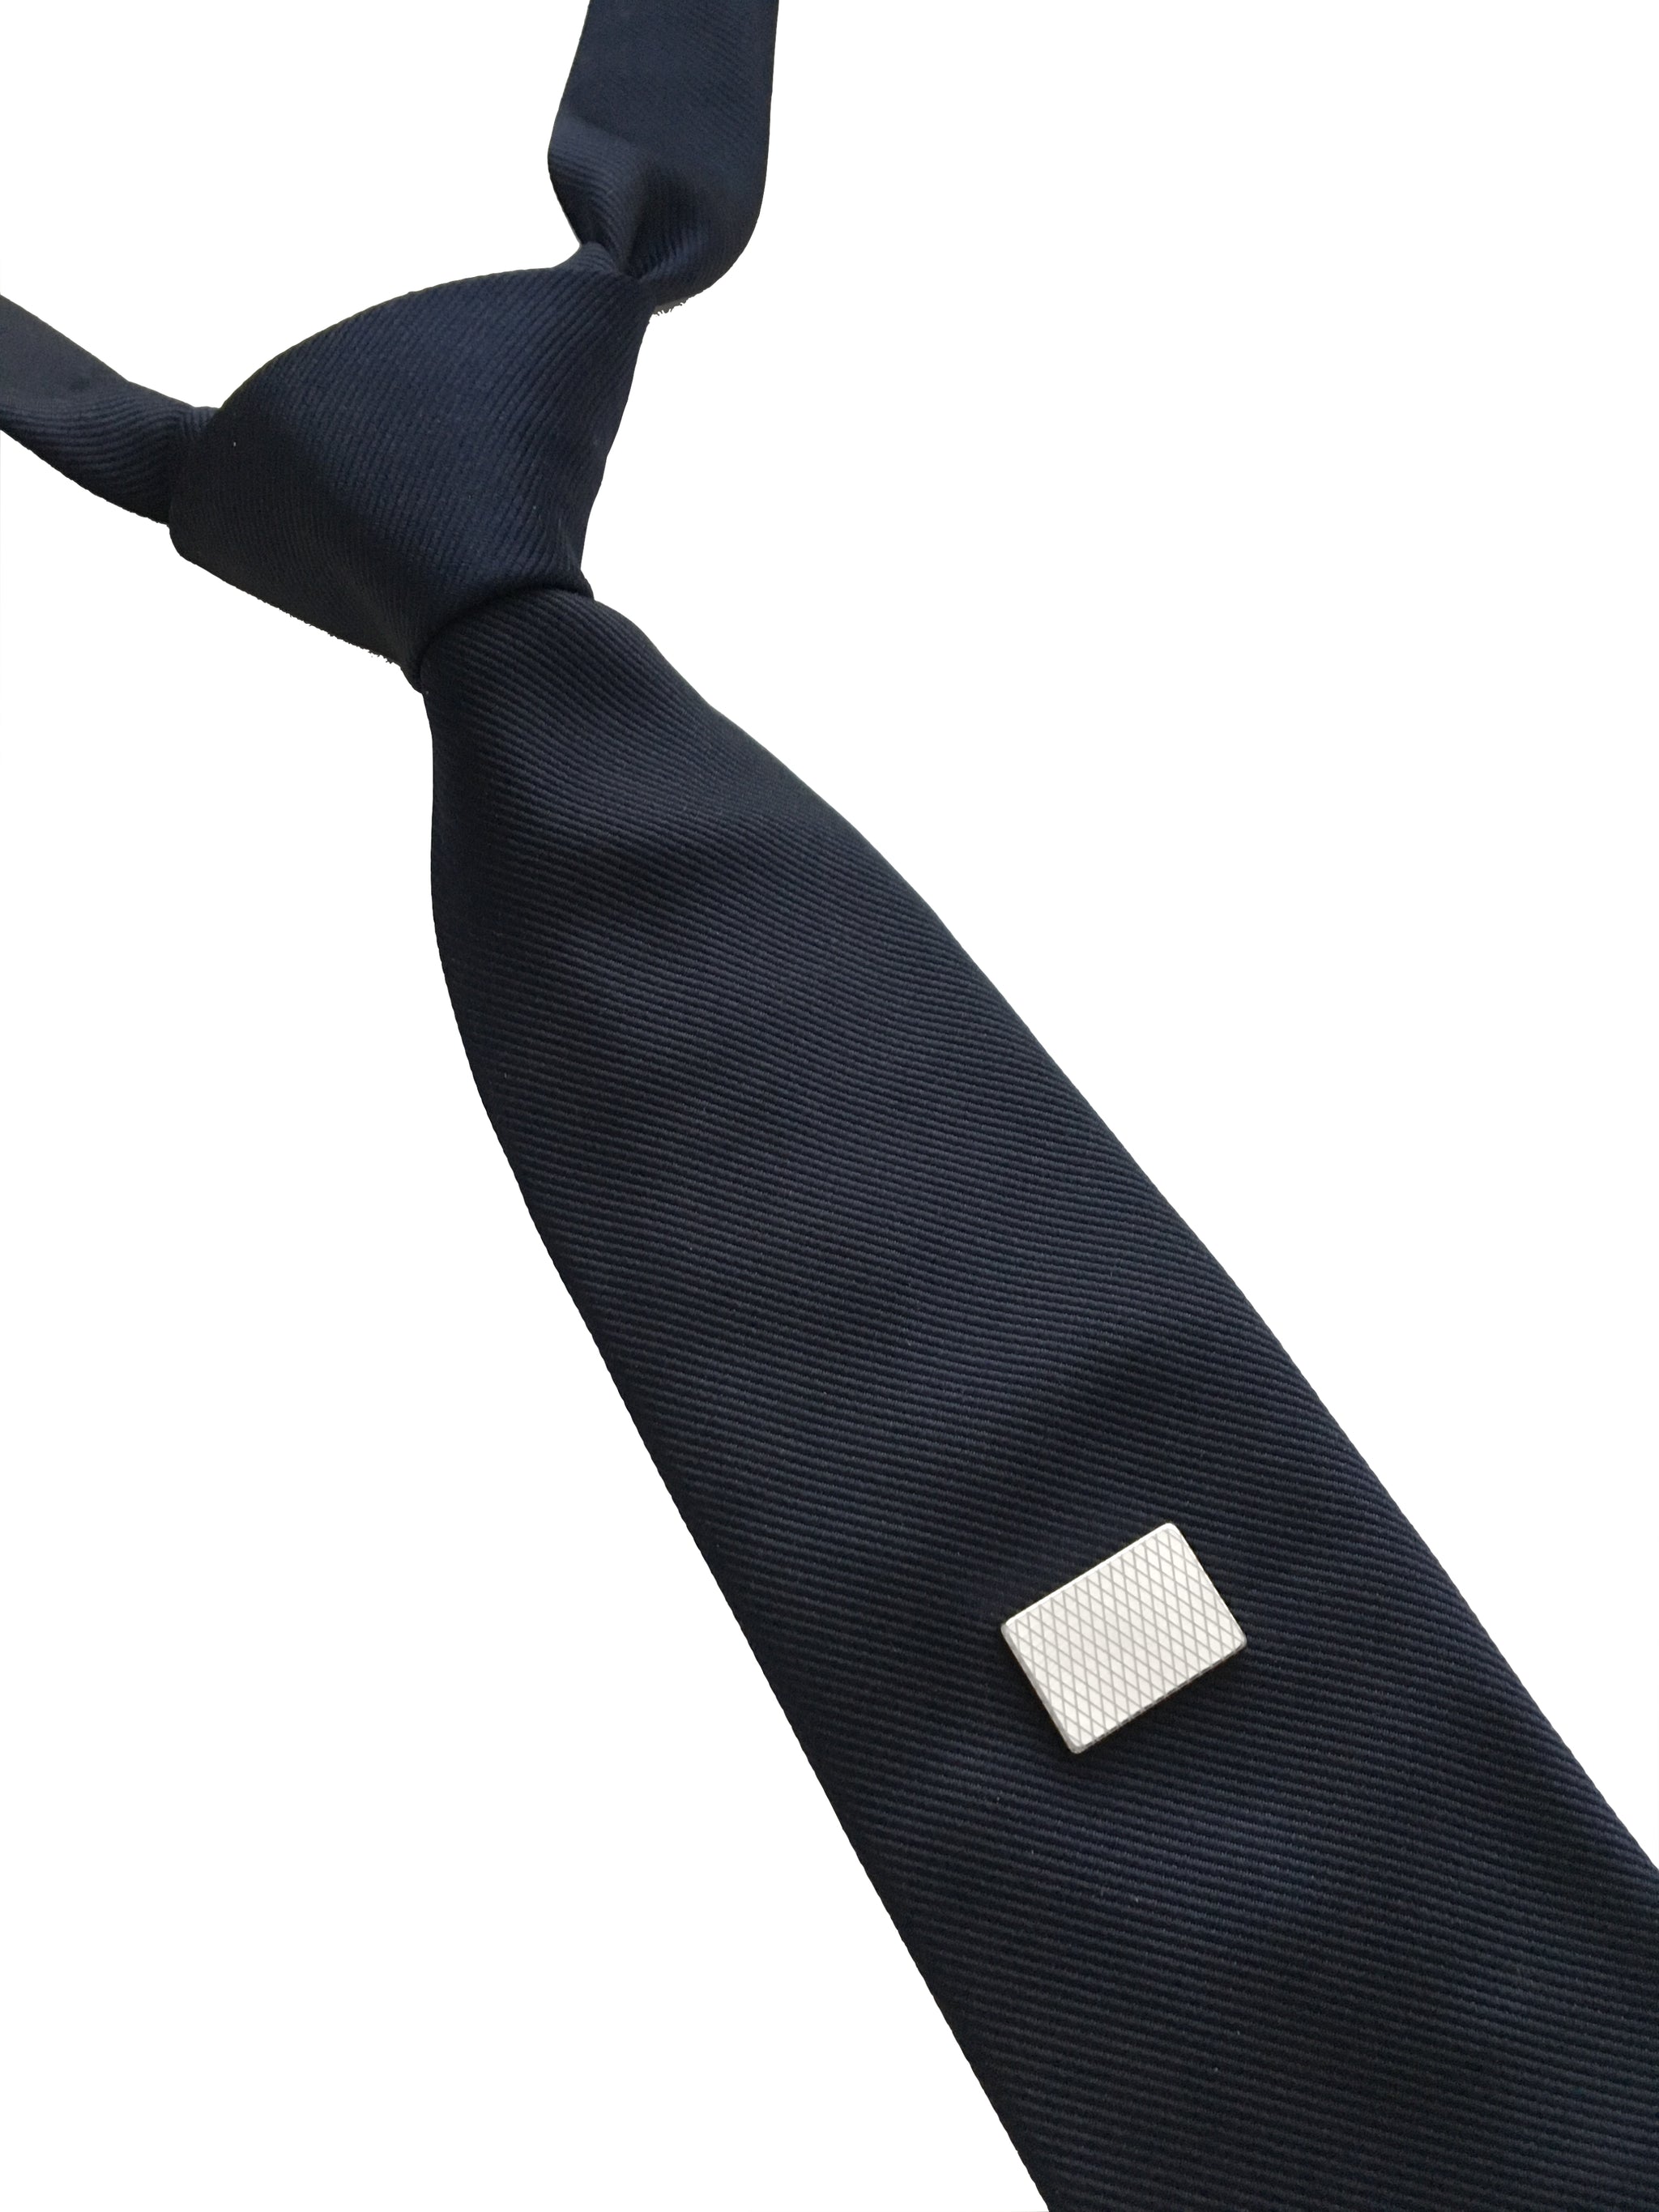 Modern Magnetic Tie Clips